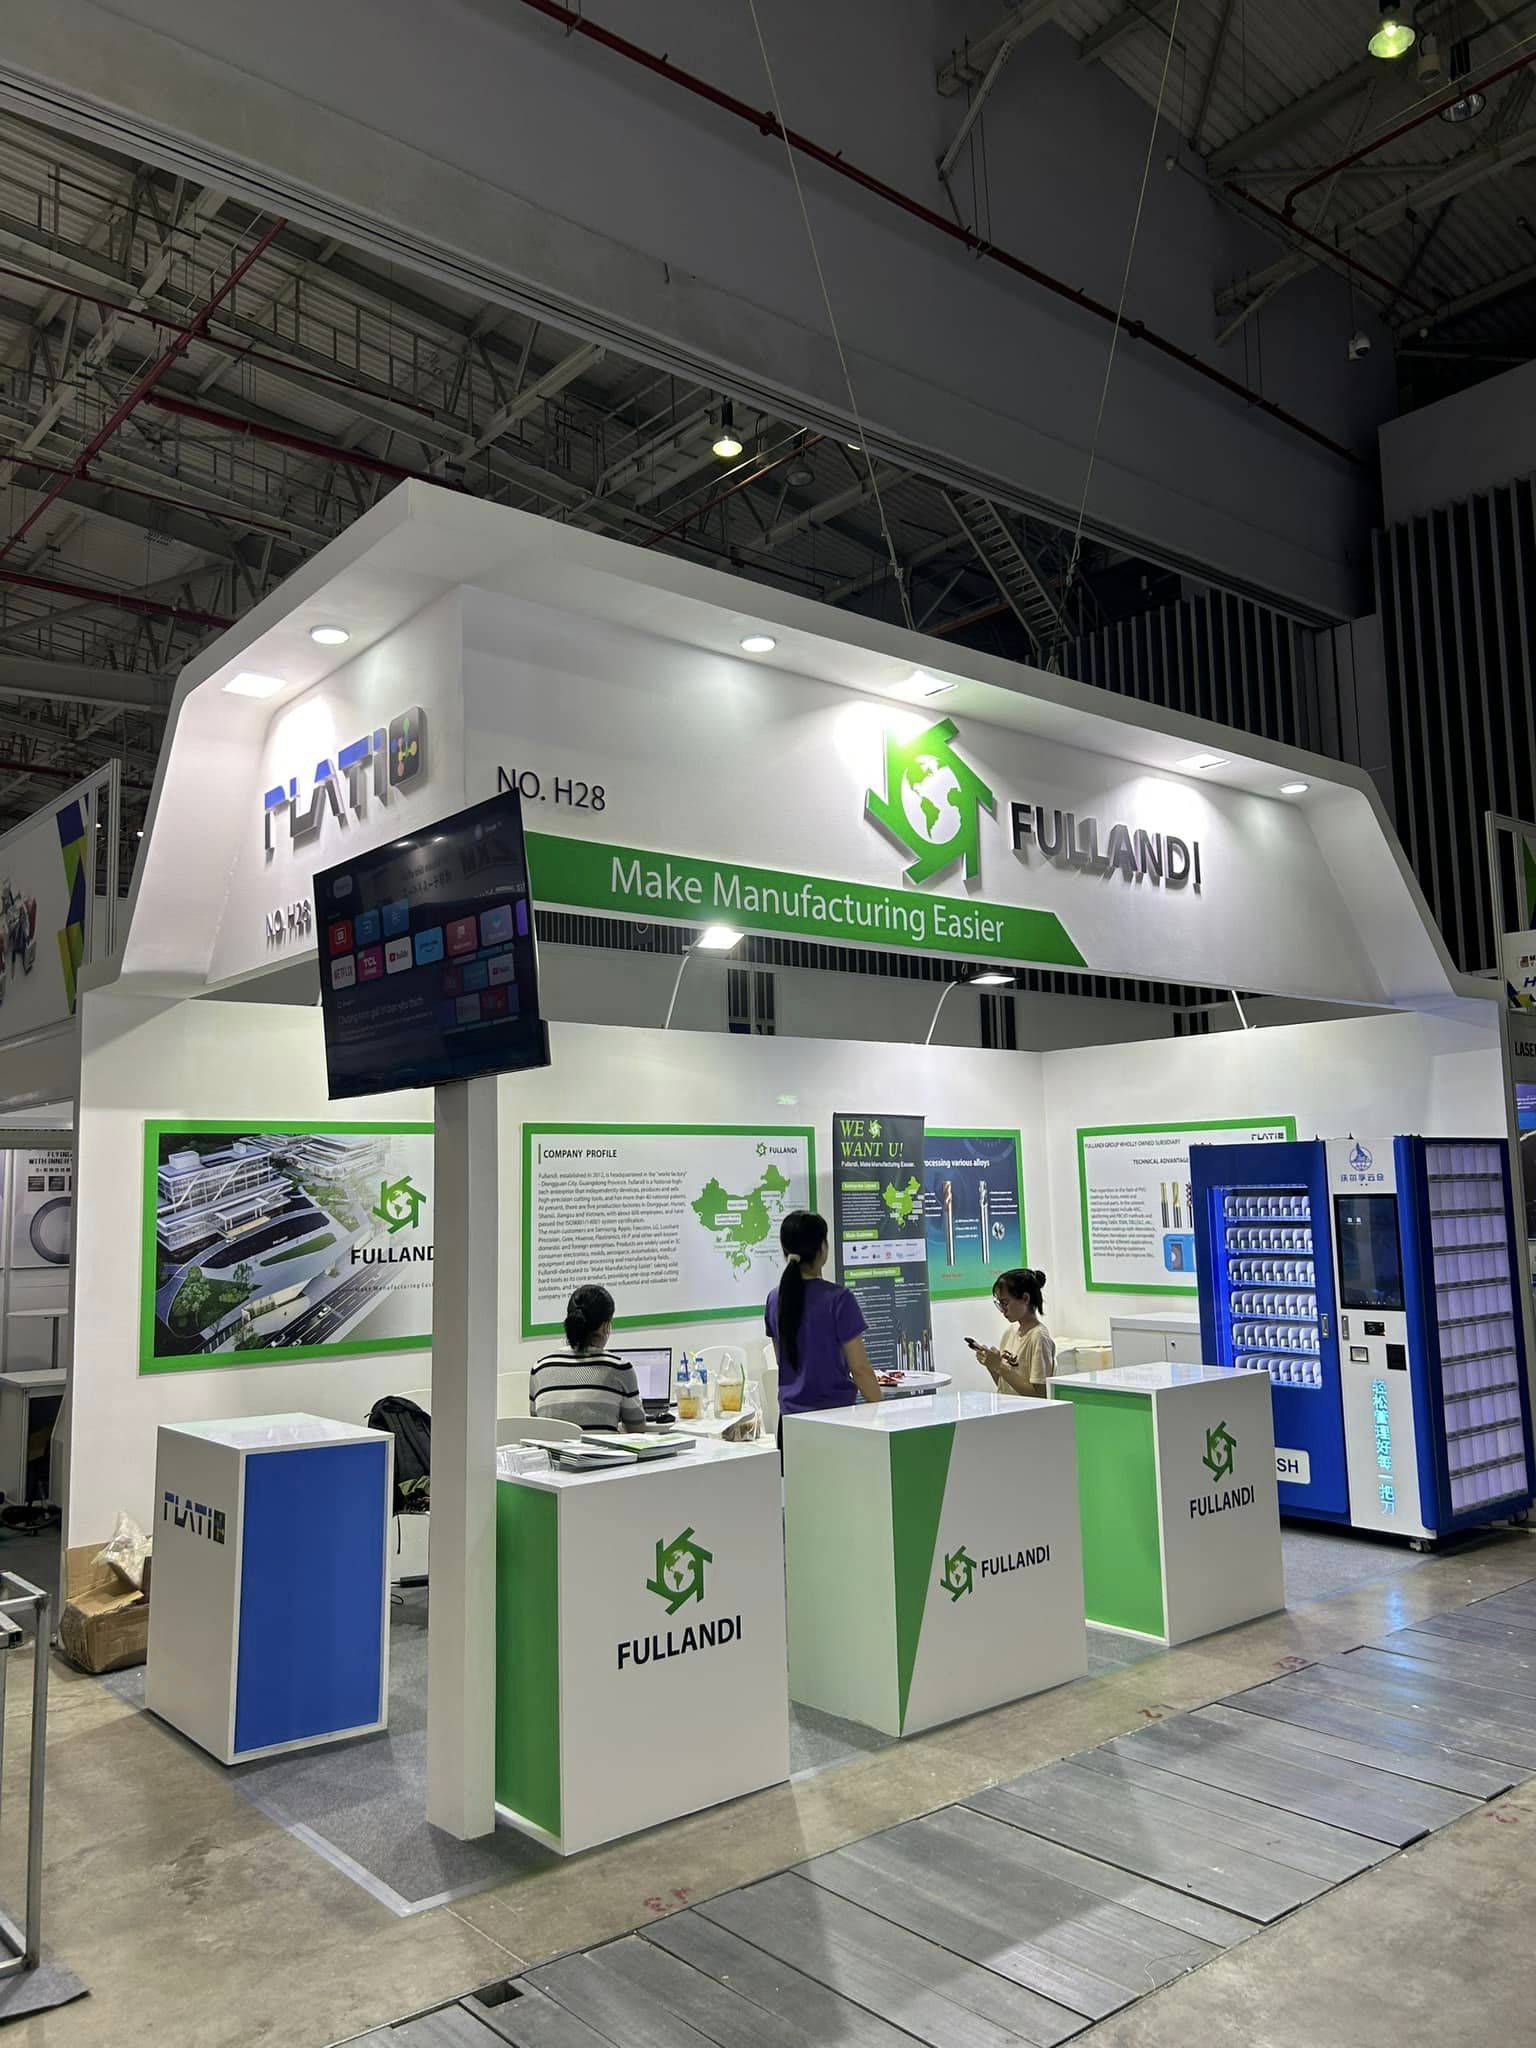 Exhibition stand builders Vietnam - Adherence to Exhibition Booth Design Rules and Event Organizer Regulations